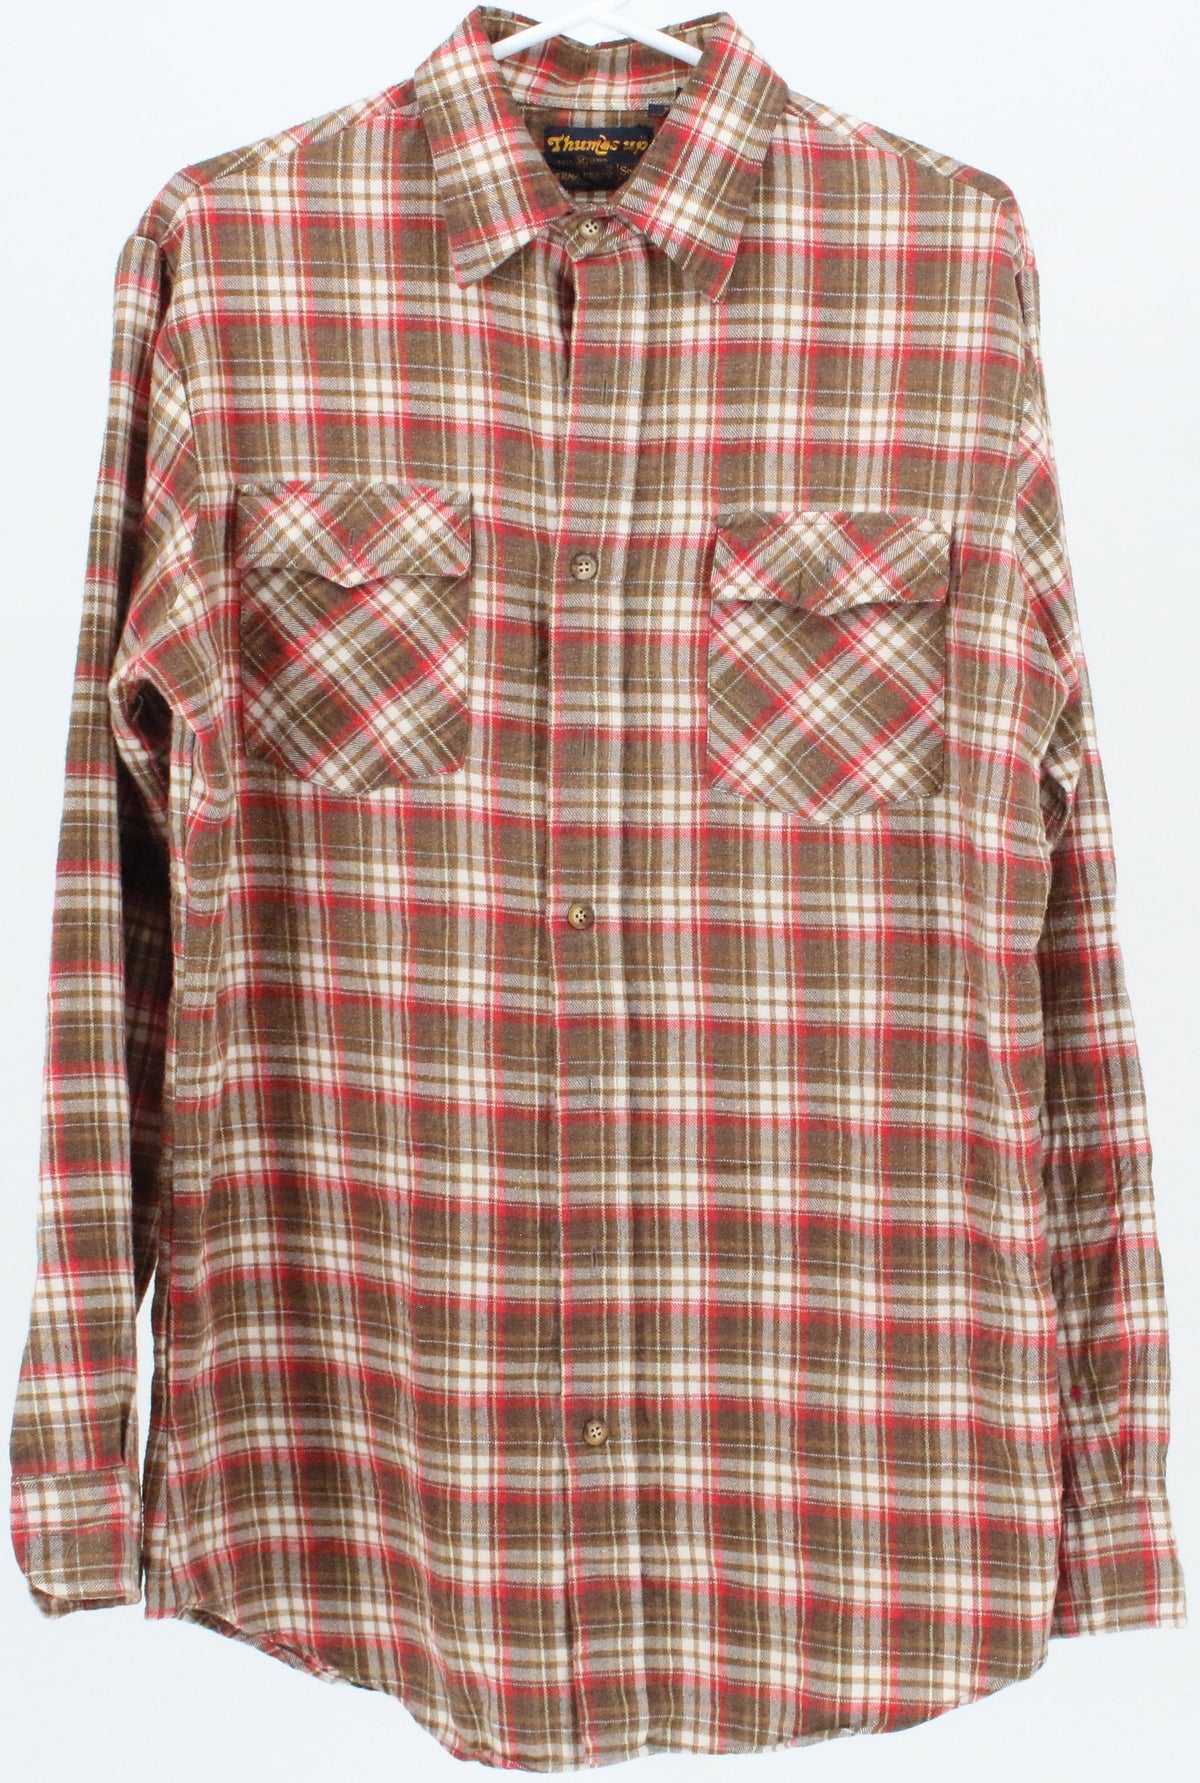 Thumbs Up Sears Brown and Red Plaid Flannel Shirt